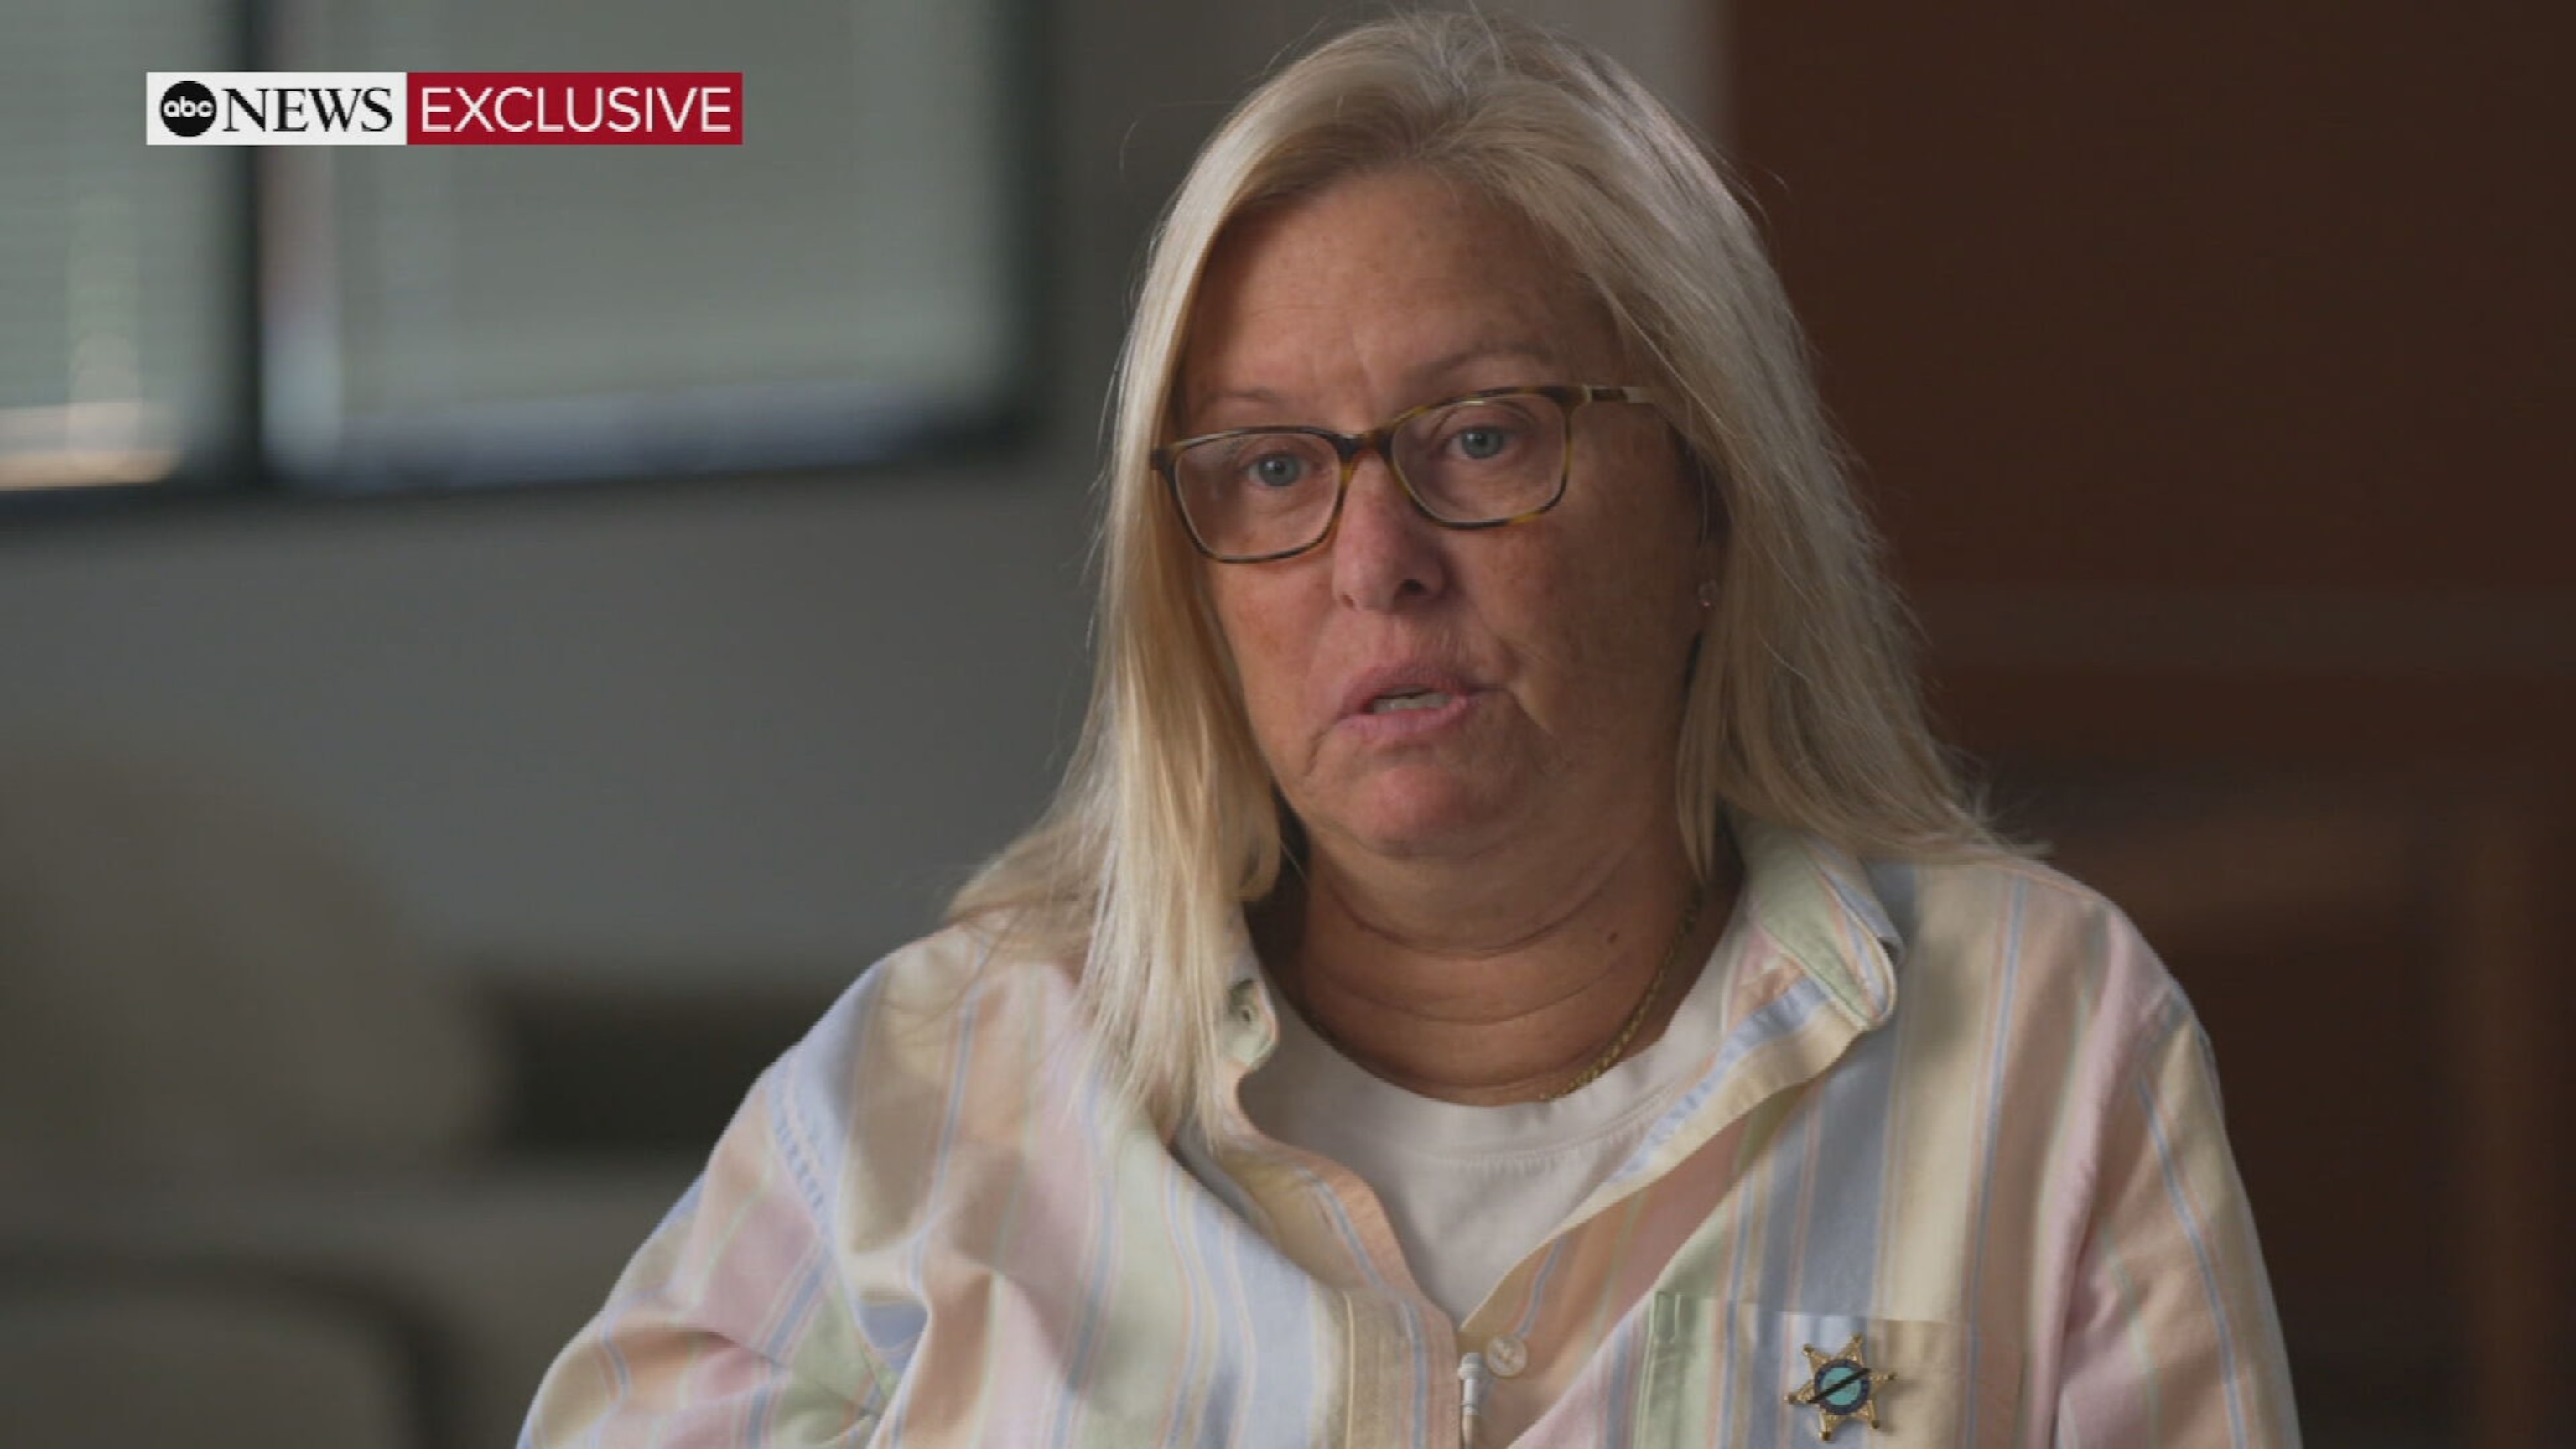 PHOTO: Kim Clinkunbroomer, the mother of slain Los Angeles County sheriff's deputy Ryan Clinkunbroomer, speaks to ABC News in an exclusive interview.